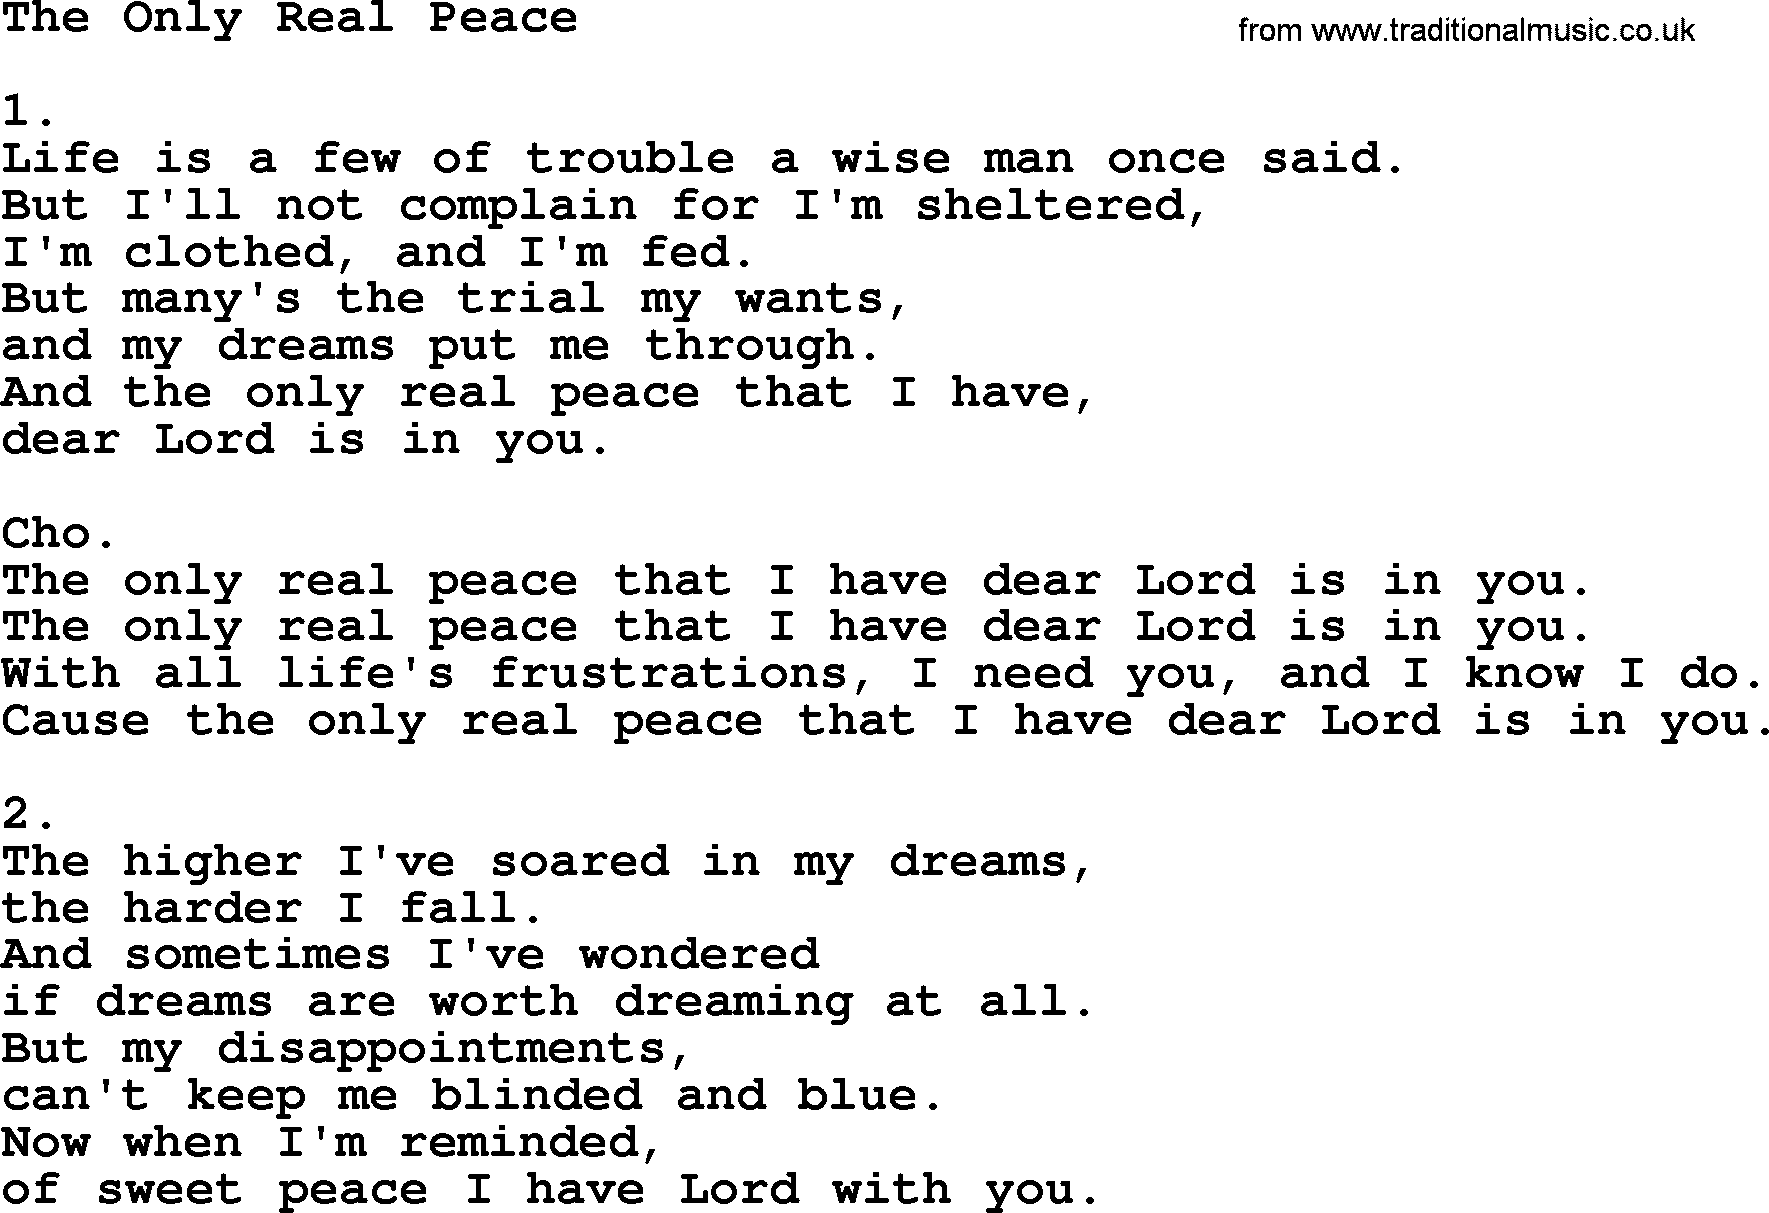 Apostolic & Pentecostal Hymns and Songs, Hymn: The Only Real Peace lyrics and PDF